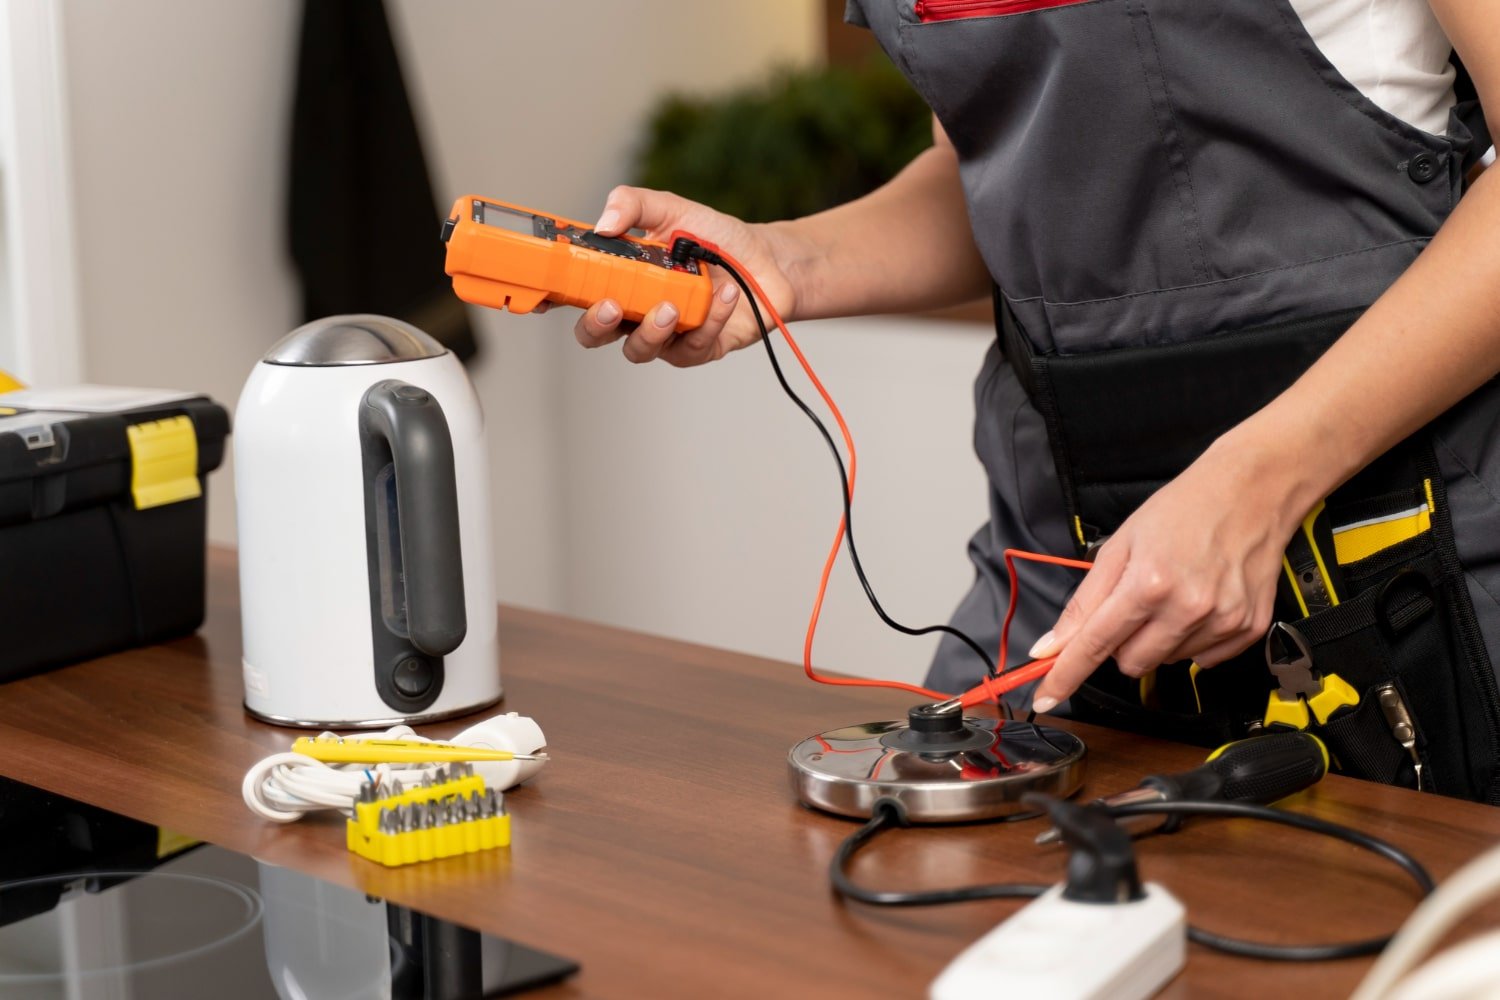 Find The Best Tools For Your DIY Projects With CPO Outlets’s Wide Range Of Power Tools